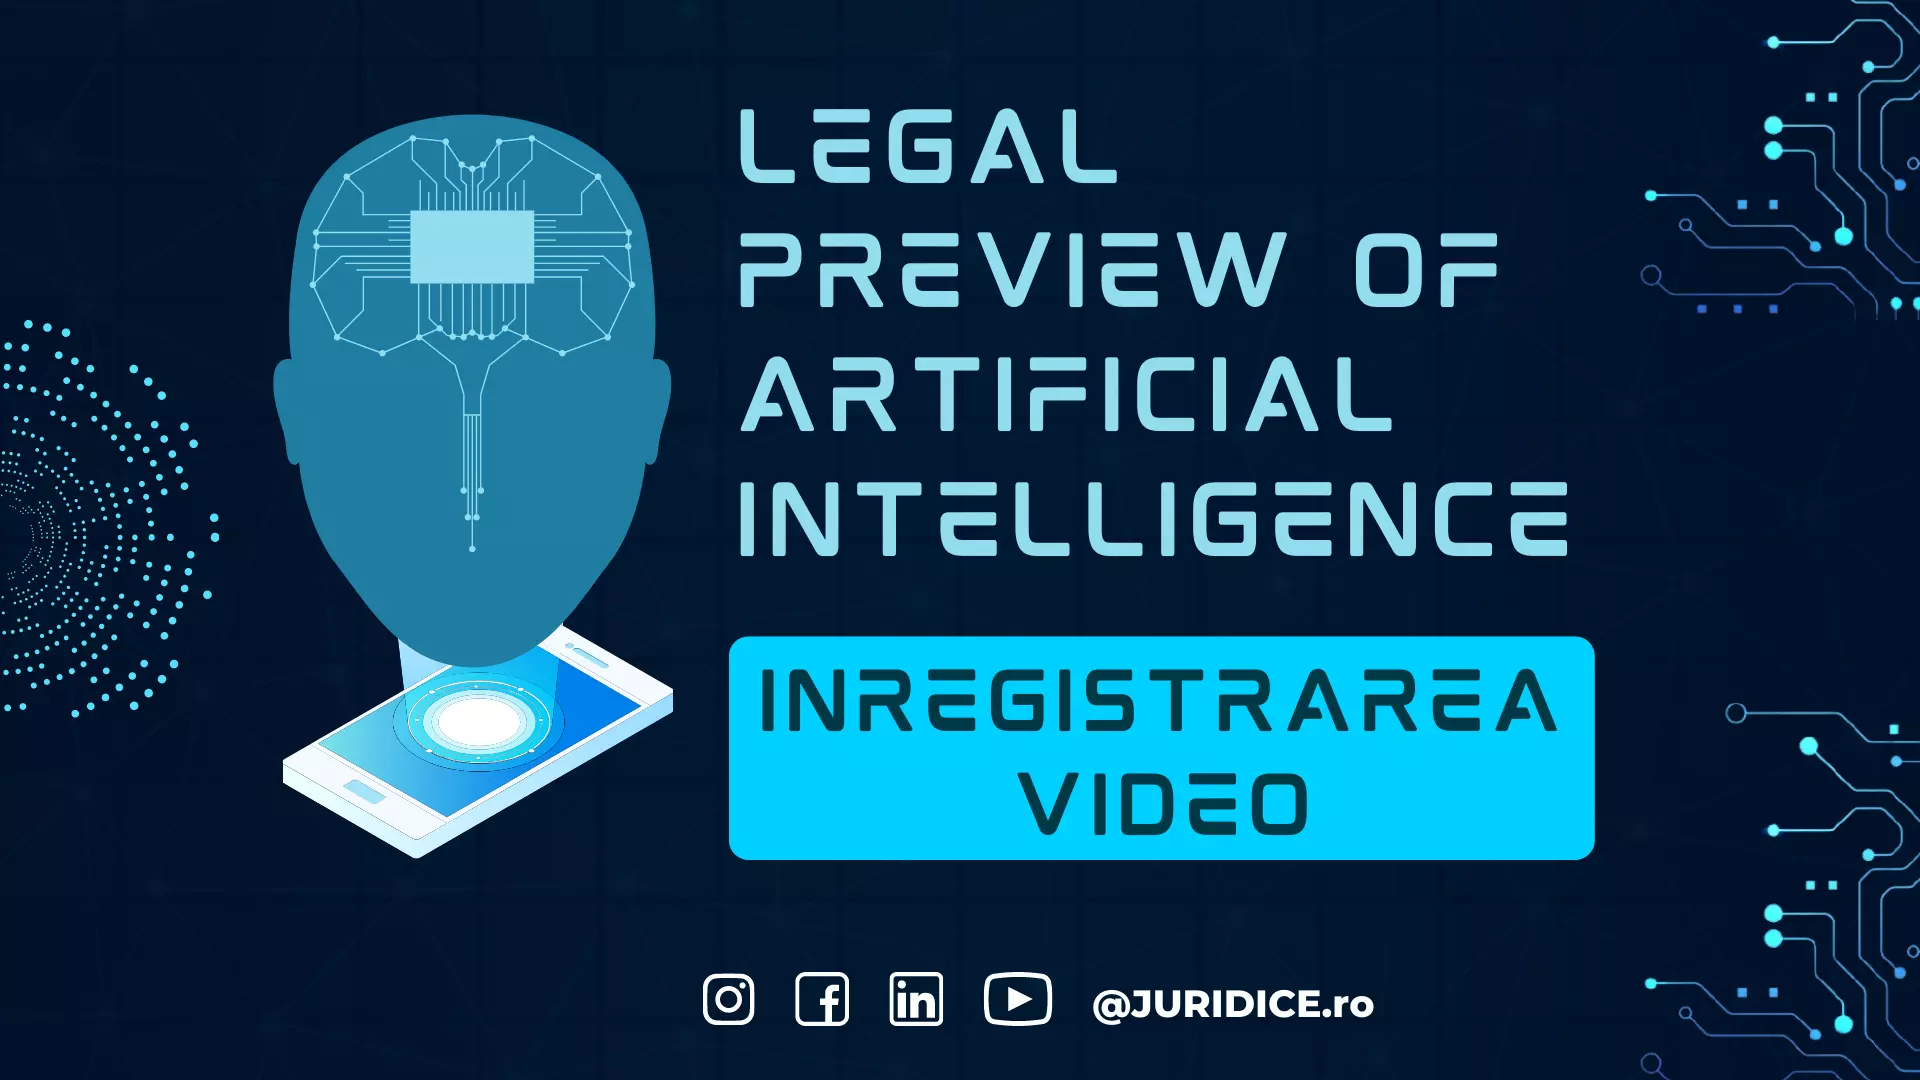 Legal Preview of Artificial Intelligence / 7 decembrie 2022